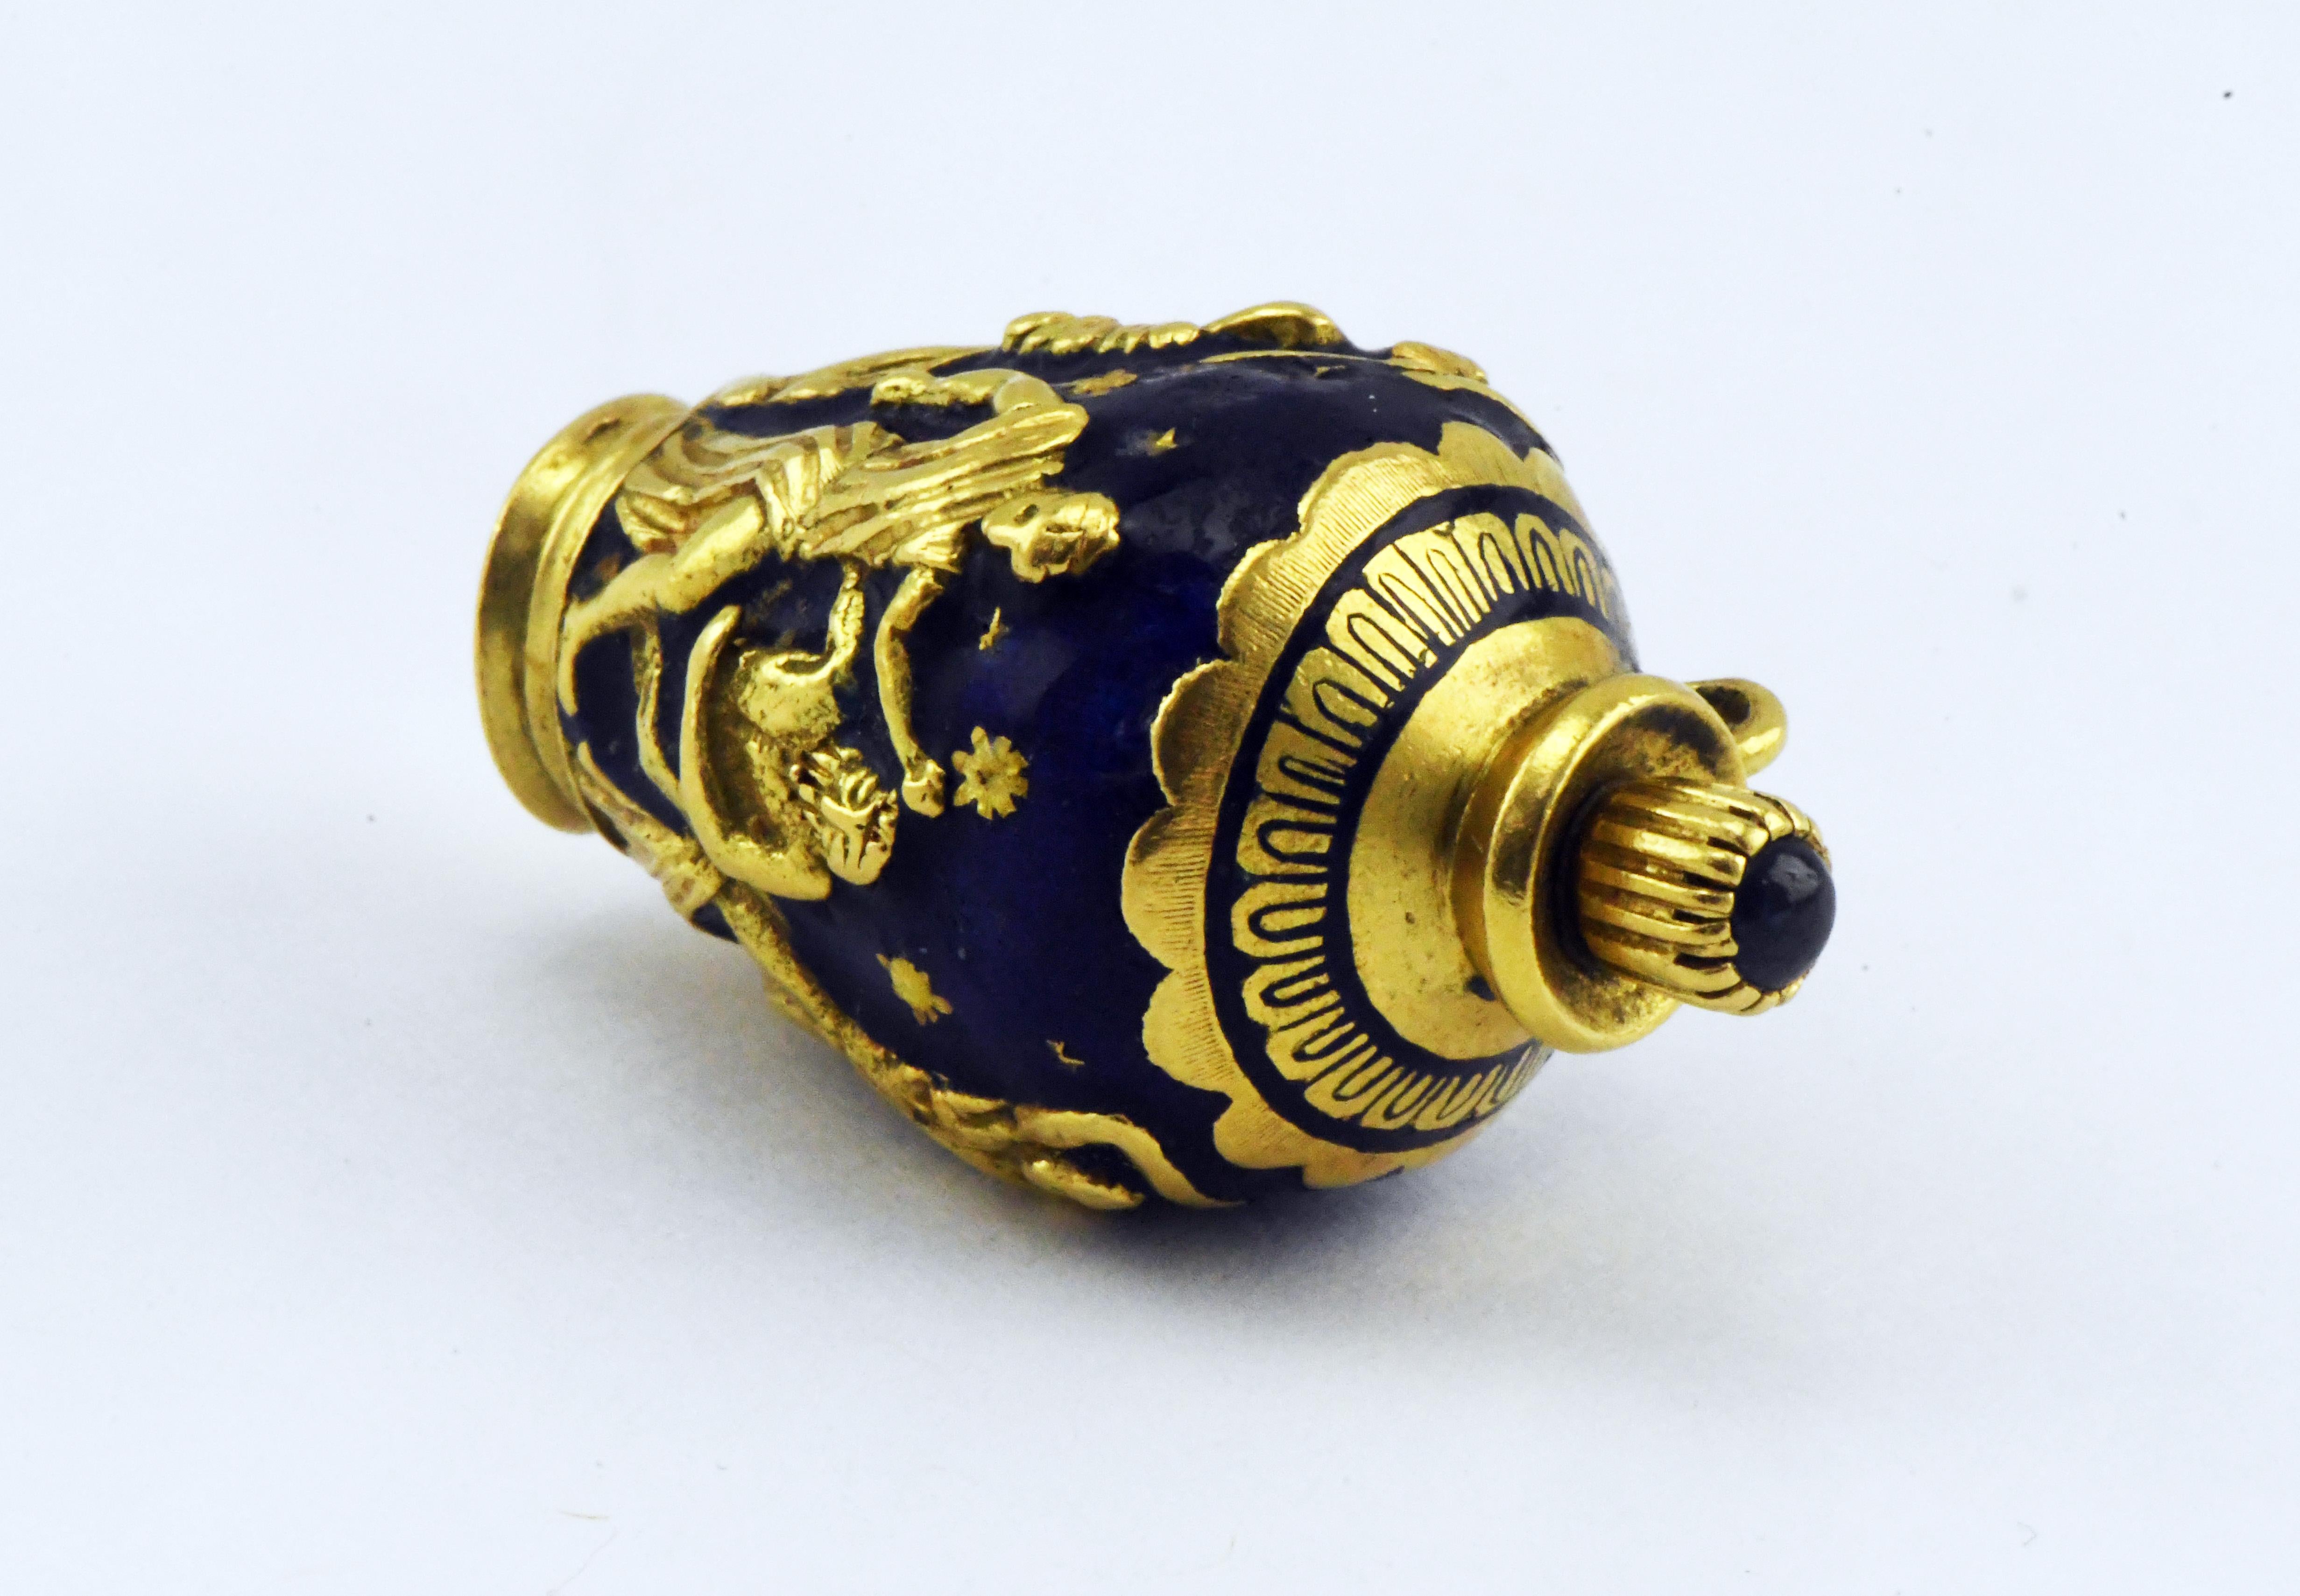 18k Yellow Gold Enameled Brevetto & Cabochon Sapphire Italian Perfume Bottle Charm.  Greek Roman Vase Style. Piece is heavy and weighs 17.7 grams The enamel is good and the lid closes snug. The piece is signed but not sure of the maker.  the charm